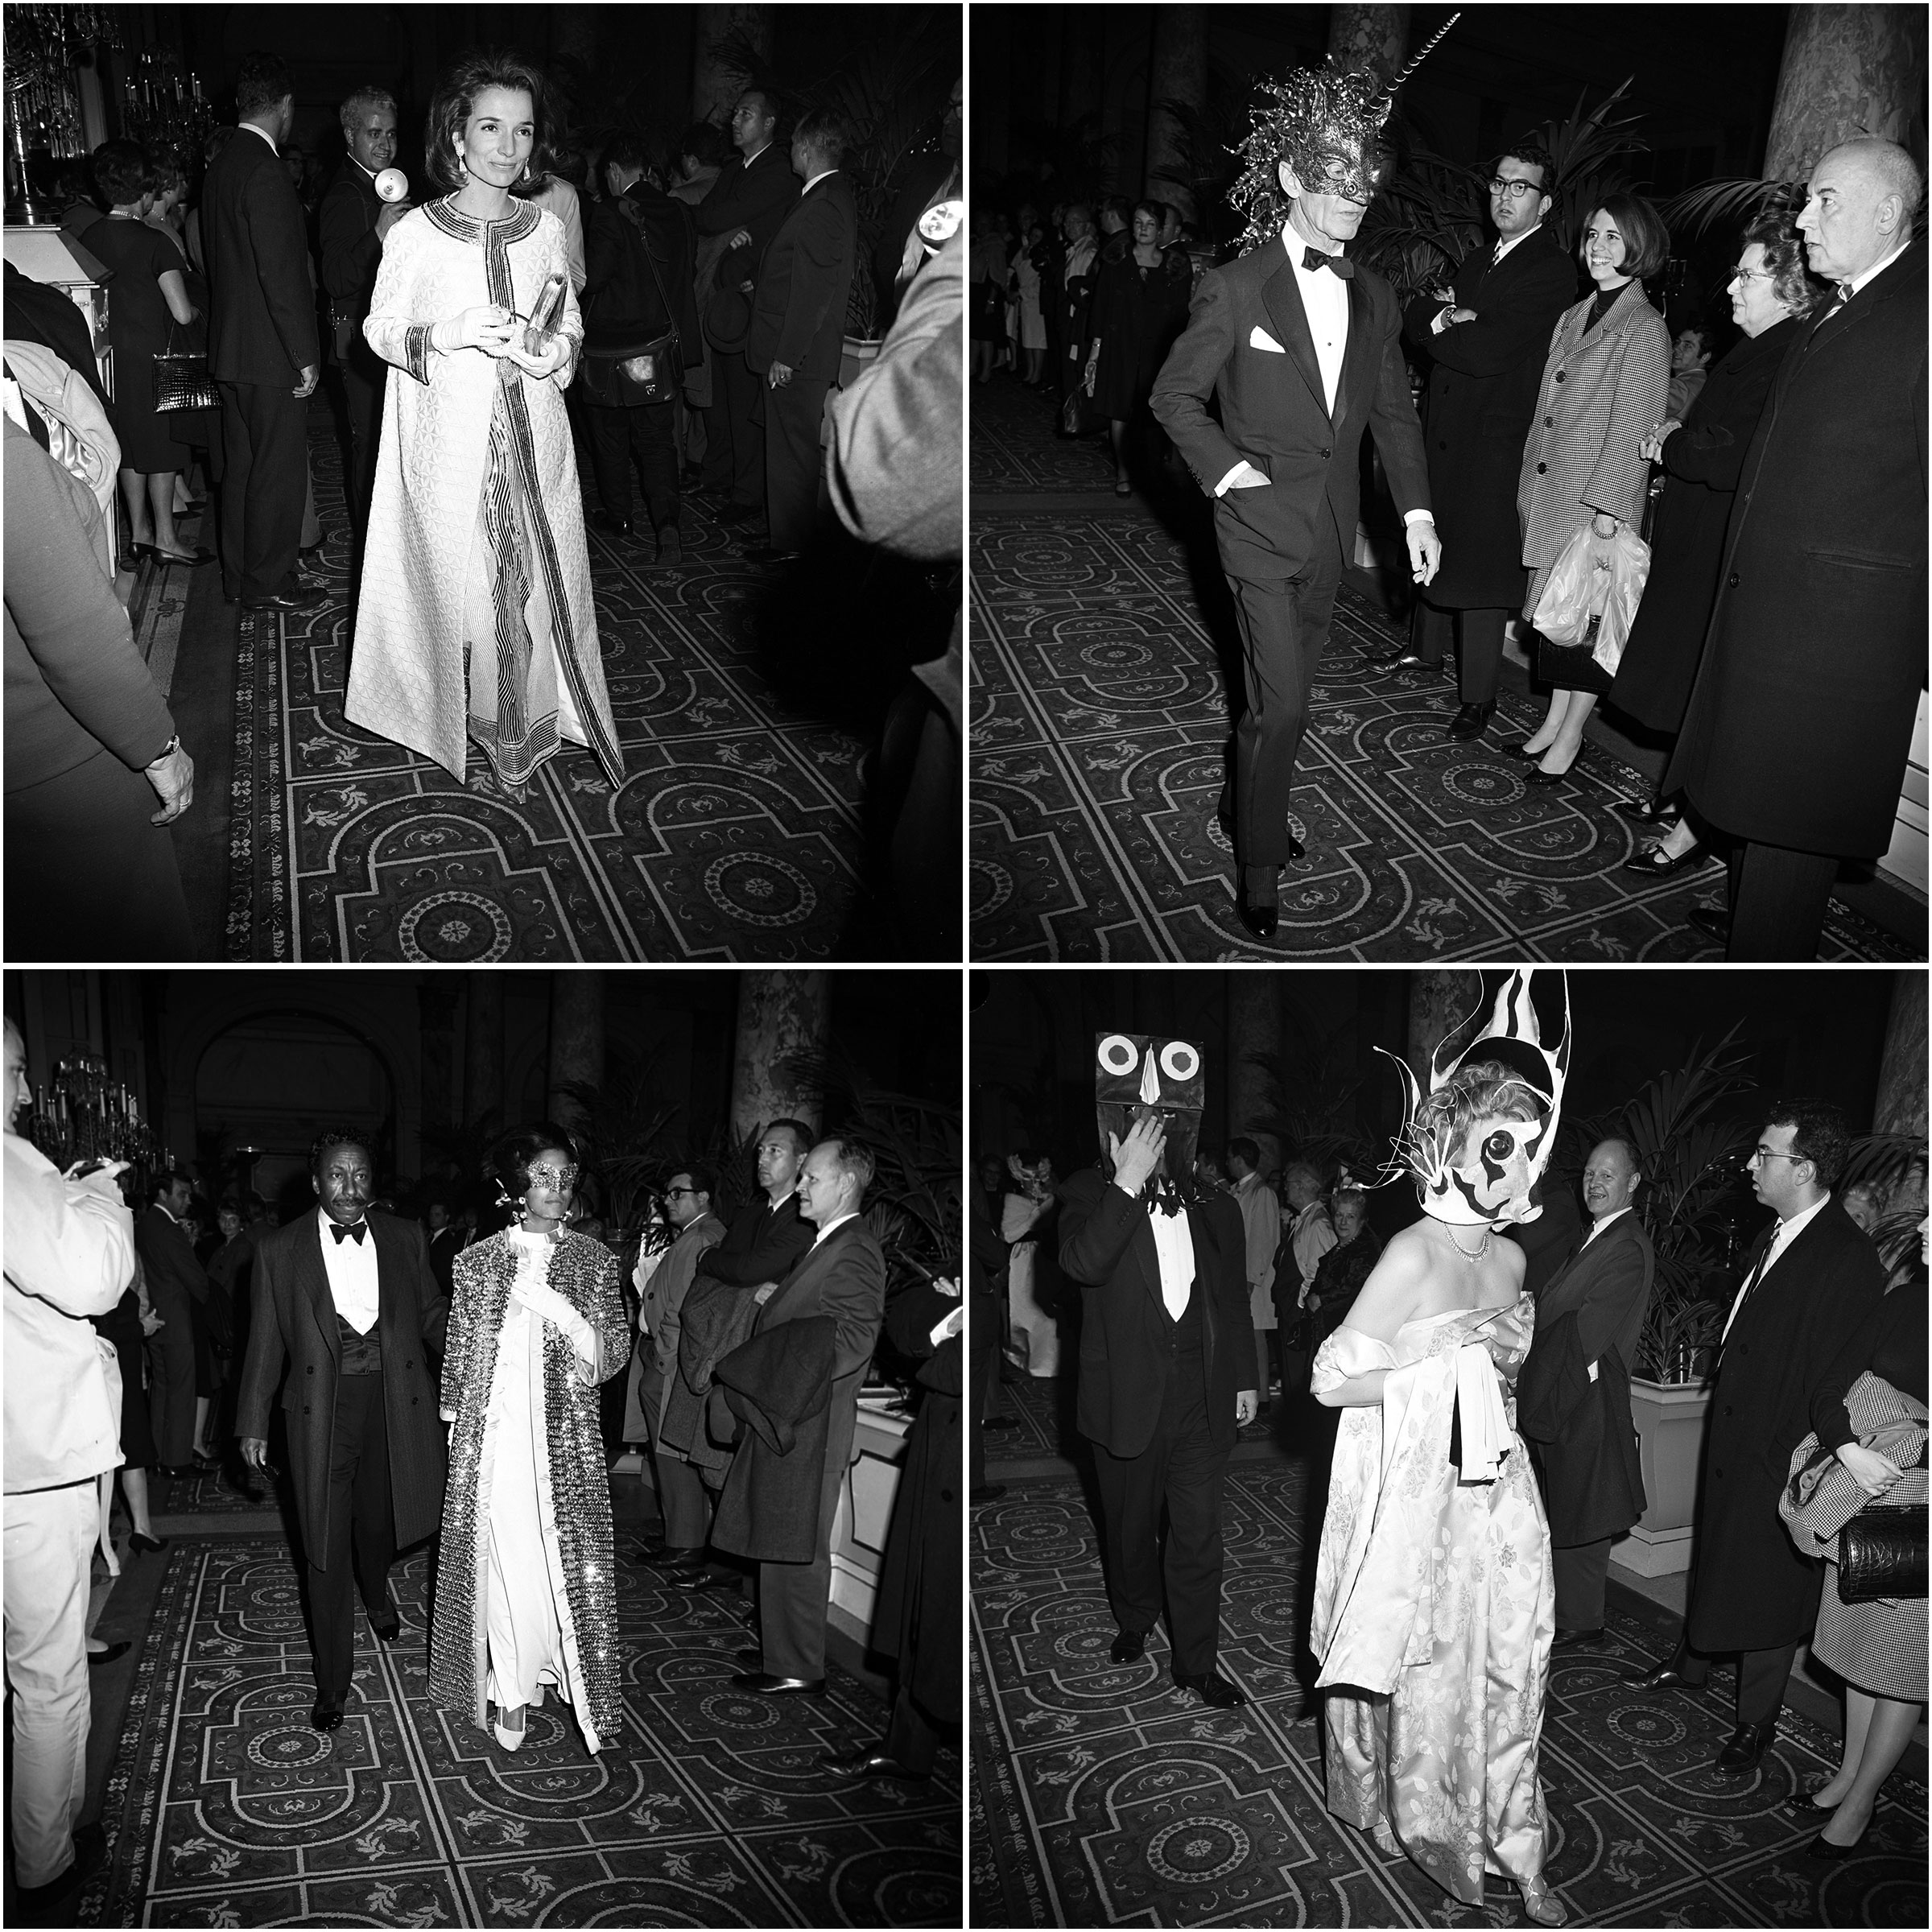 Arrivals at the Black and White Ball, clockwise from top left: Lee Radziwill, interior designer Billy Baldwin, Gordon Parks and his wife Elizabeth Campbell, John Gunther and his wife.